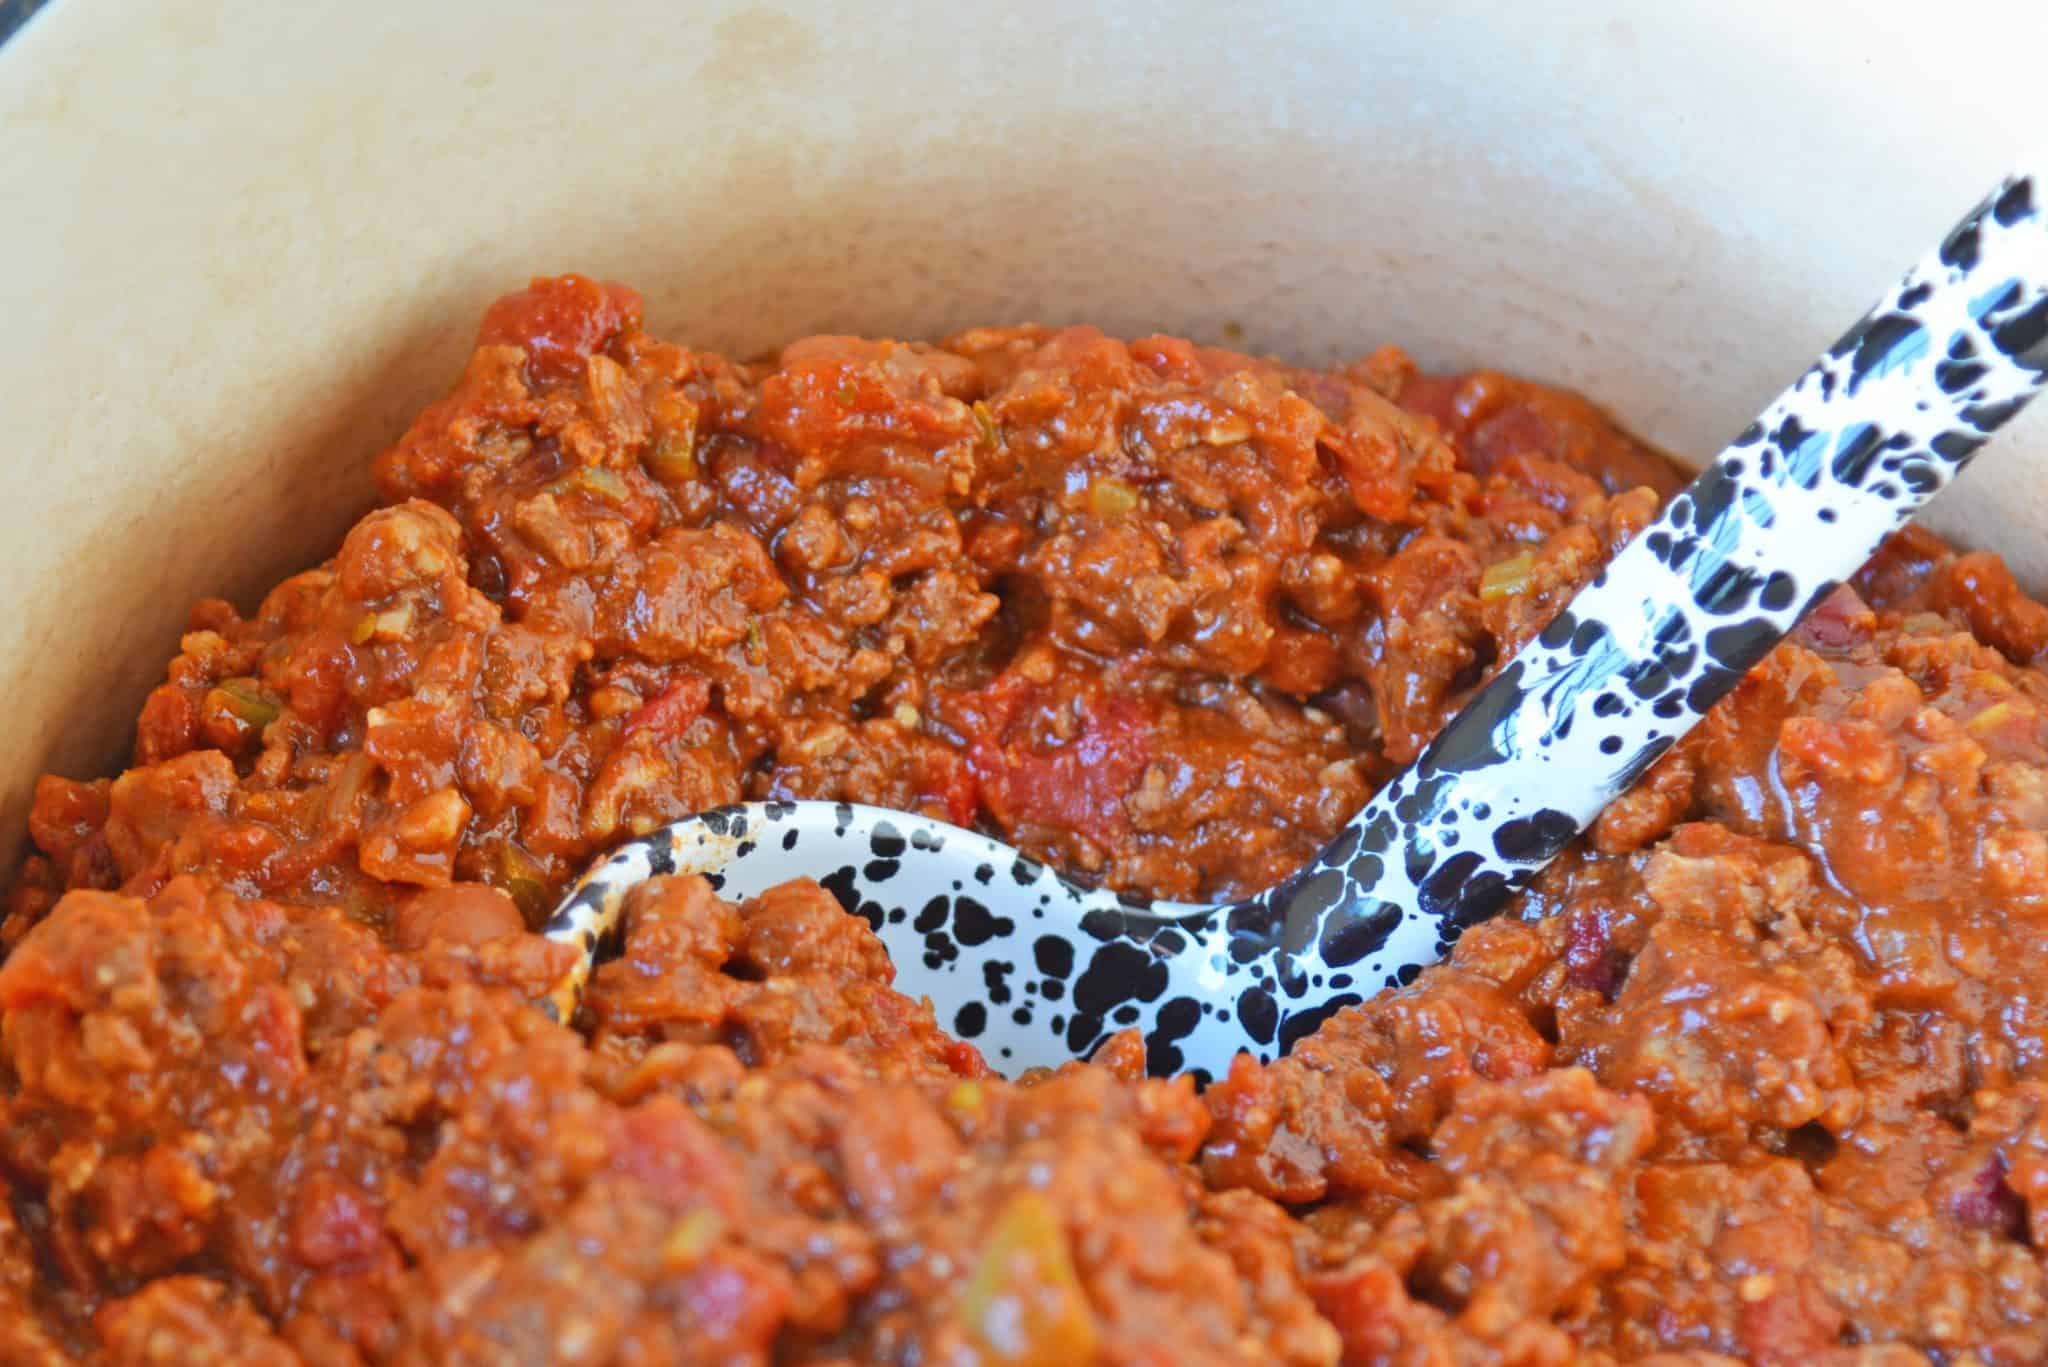 Blue Ribbon Award Winning Chili is, you guessed it, a chili cook-off winning recipe! A robust and rich stew loaded with beef, sausage, bacon and tons of vegetables. The best chili recipe ever! #awardwinningchili #bestchilirecipe www.savoryexperiments.com 